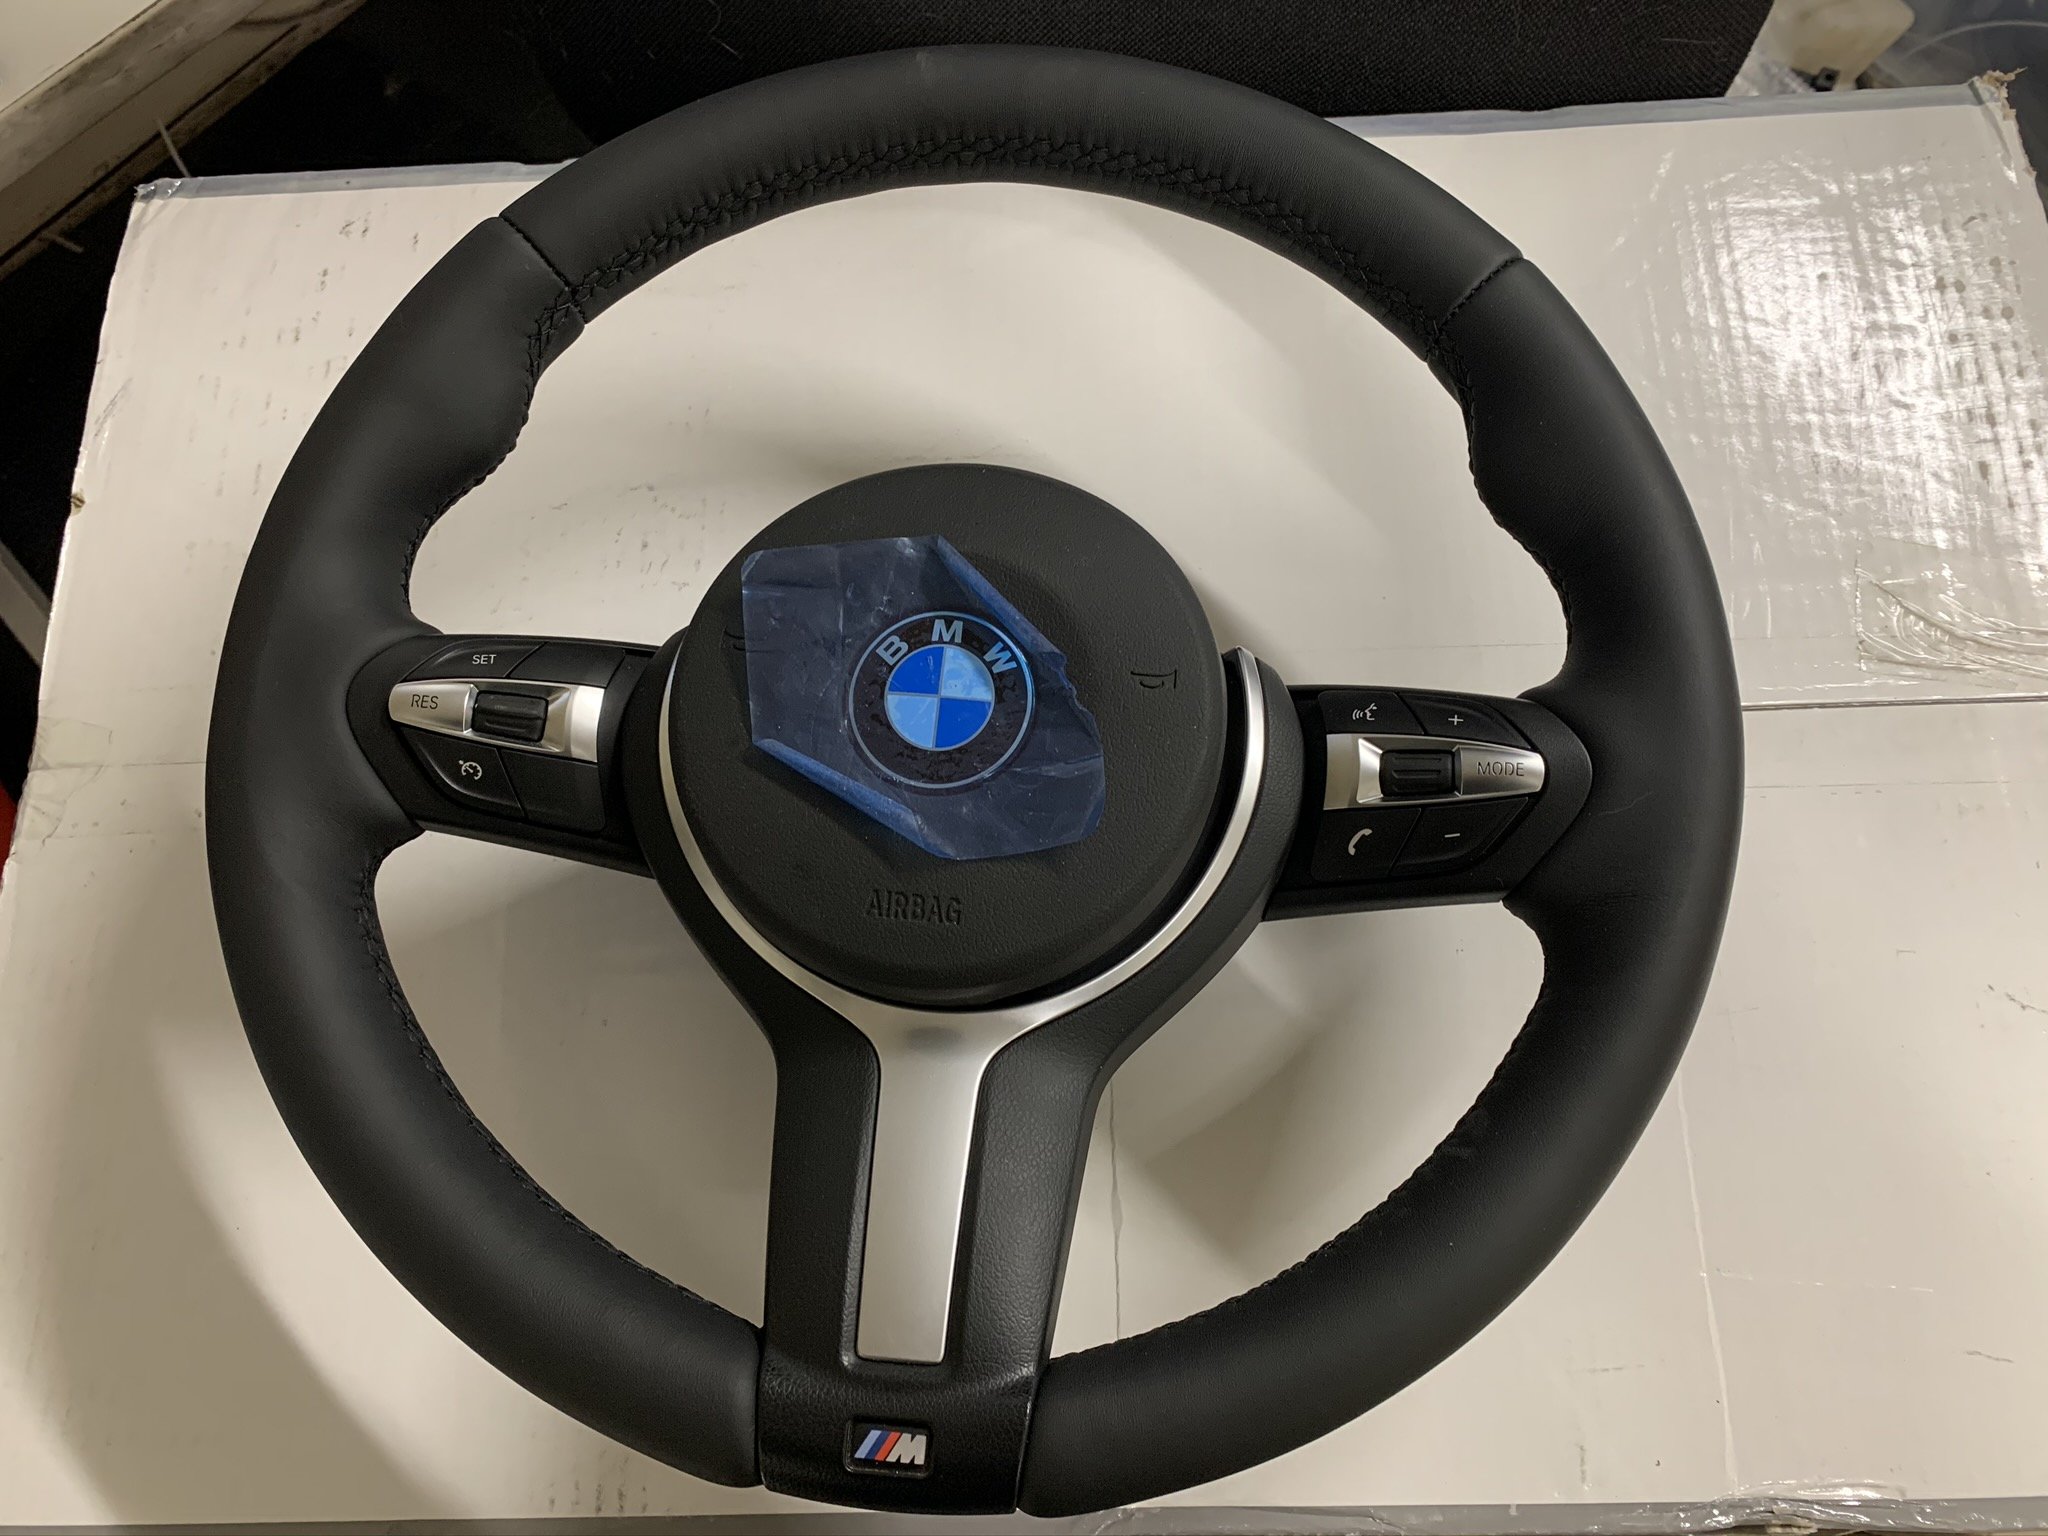 F3x M Steering Wheel Brand new - For Sale - bimmersport.co.nz Ask Me Who I Tied To The Steering Wheel